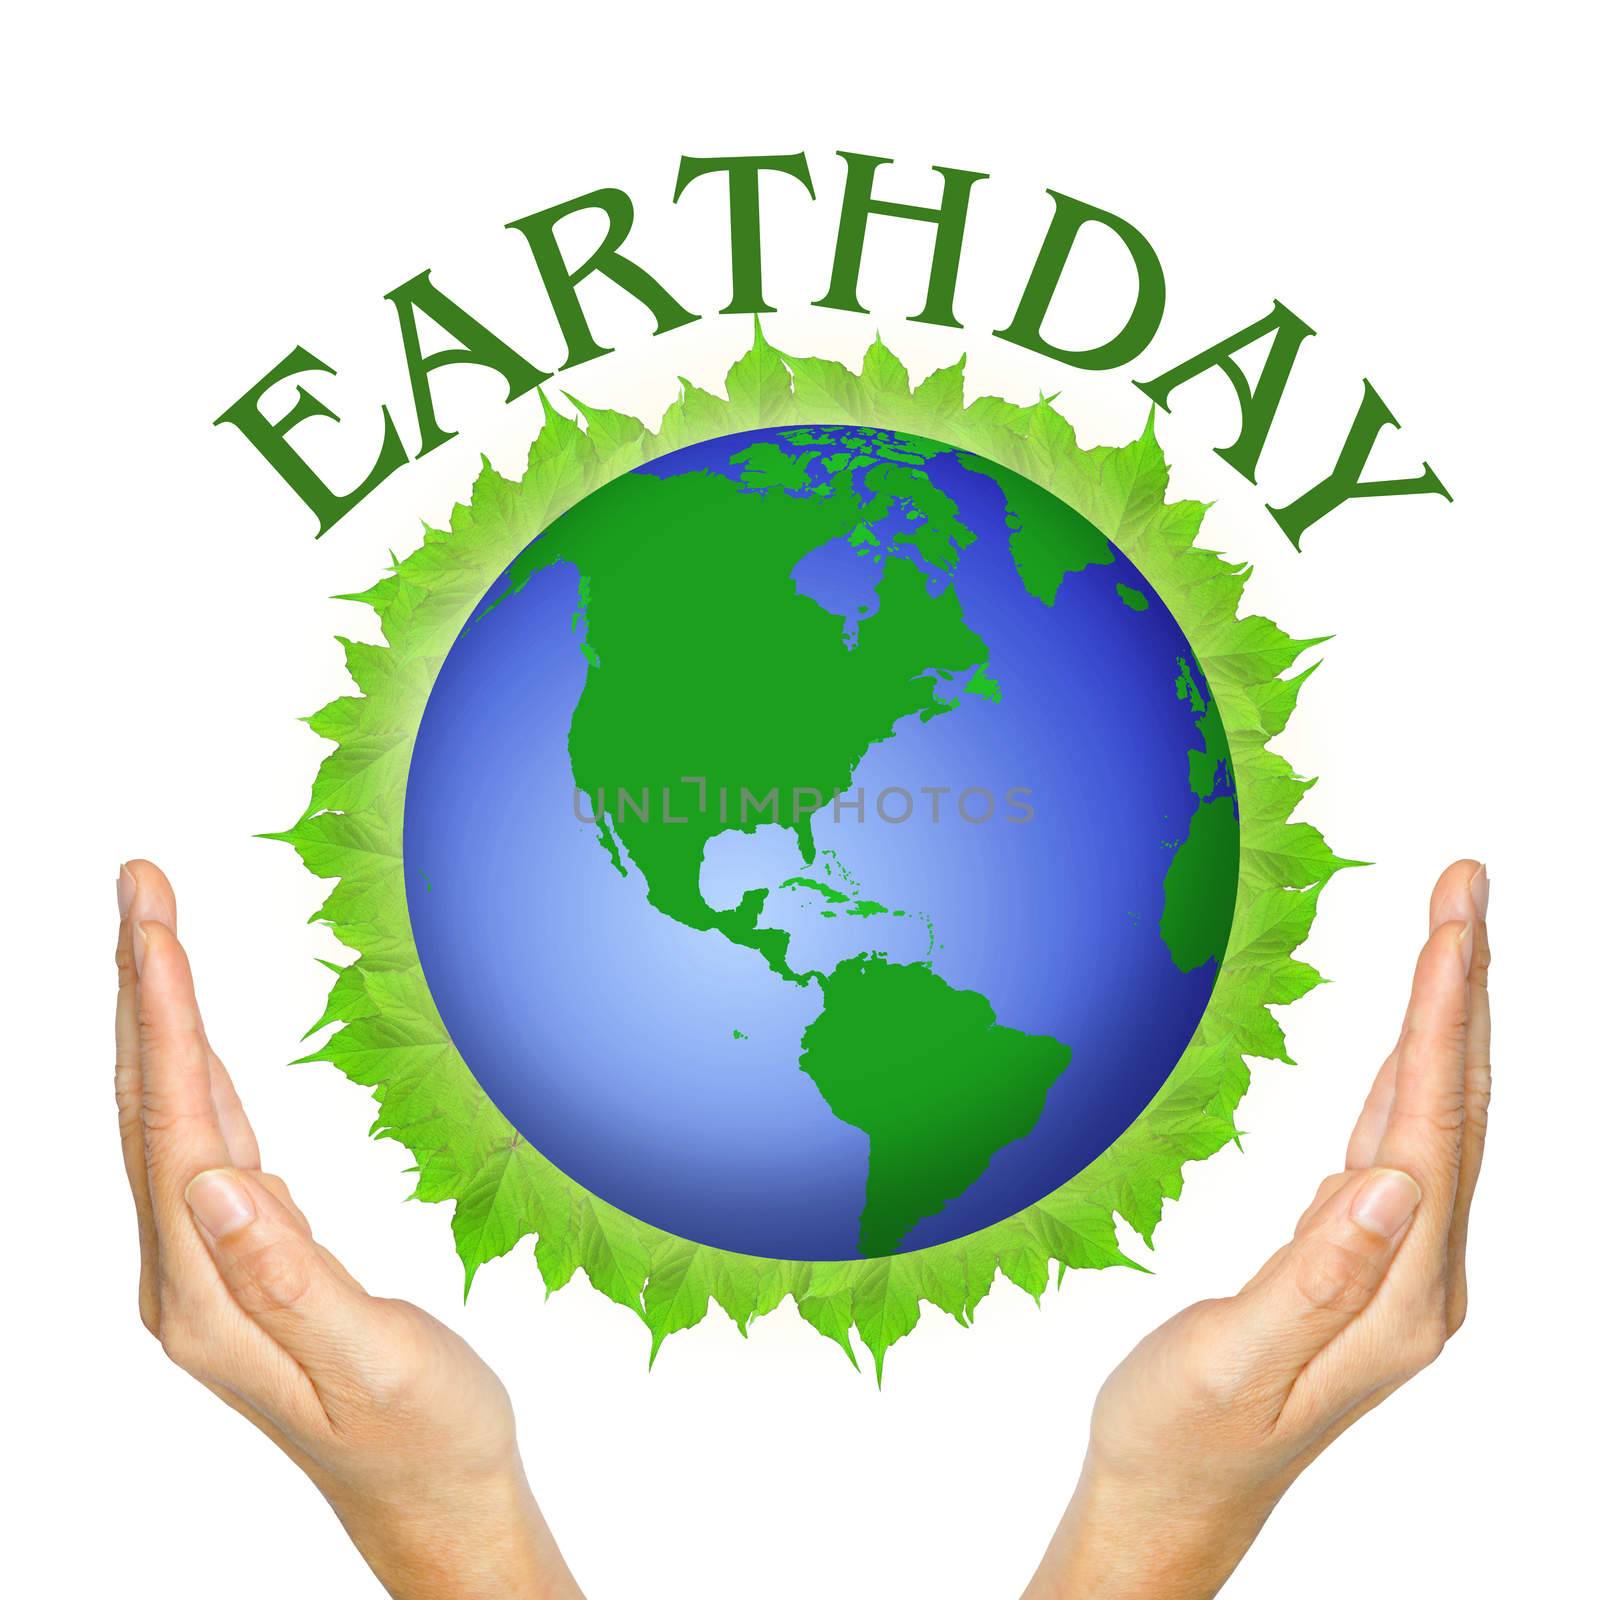 hands and globe on leaves and wording Earthday on white background.